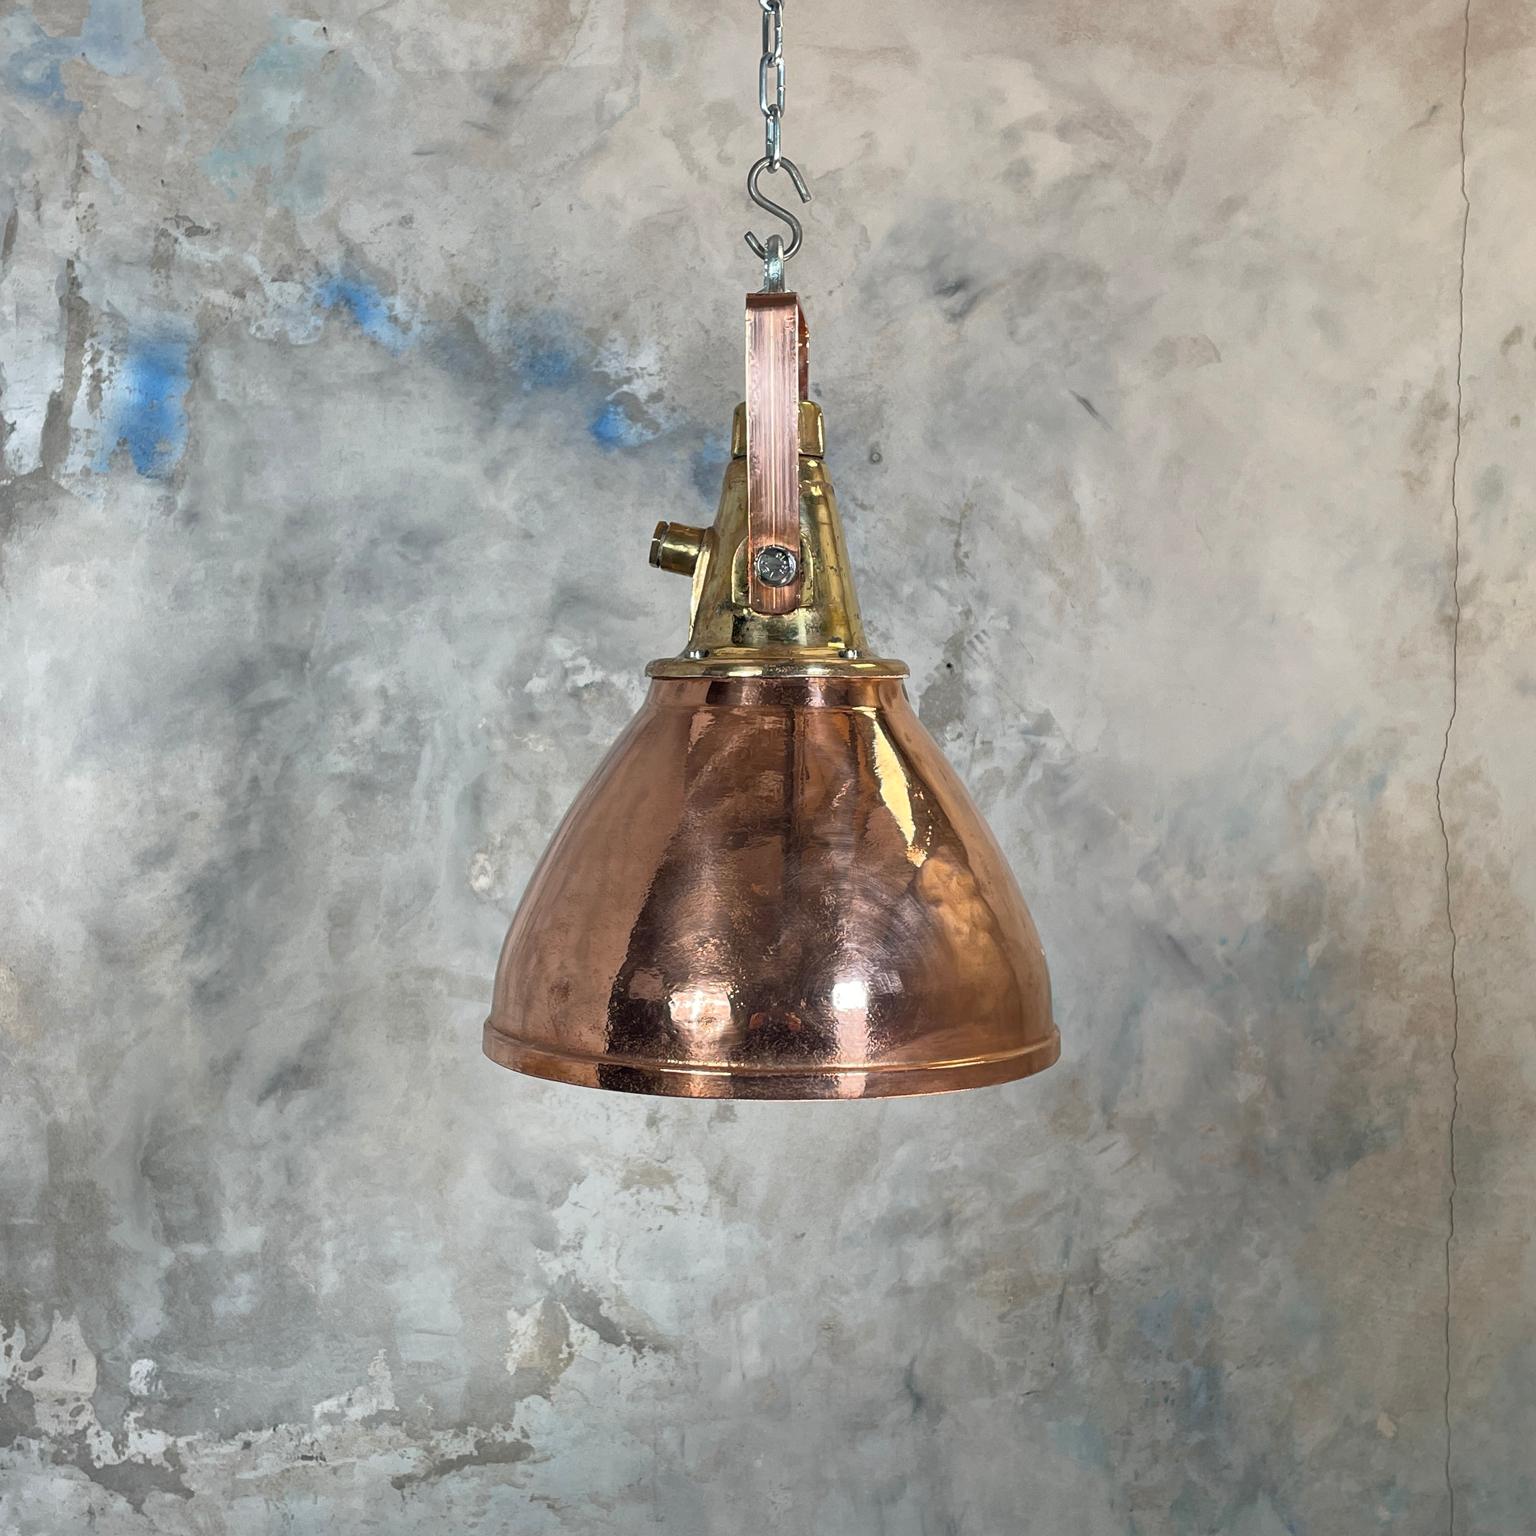 1970s German Copper & Brass Industrial Ceiling Pendant Light with Beam Focus 13